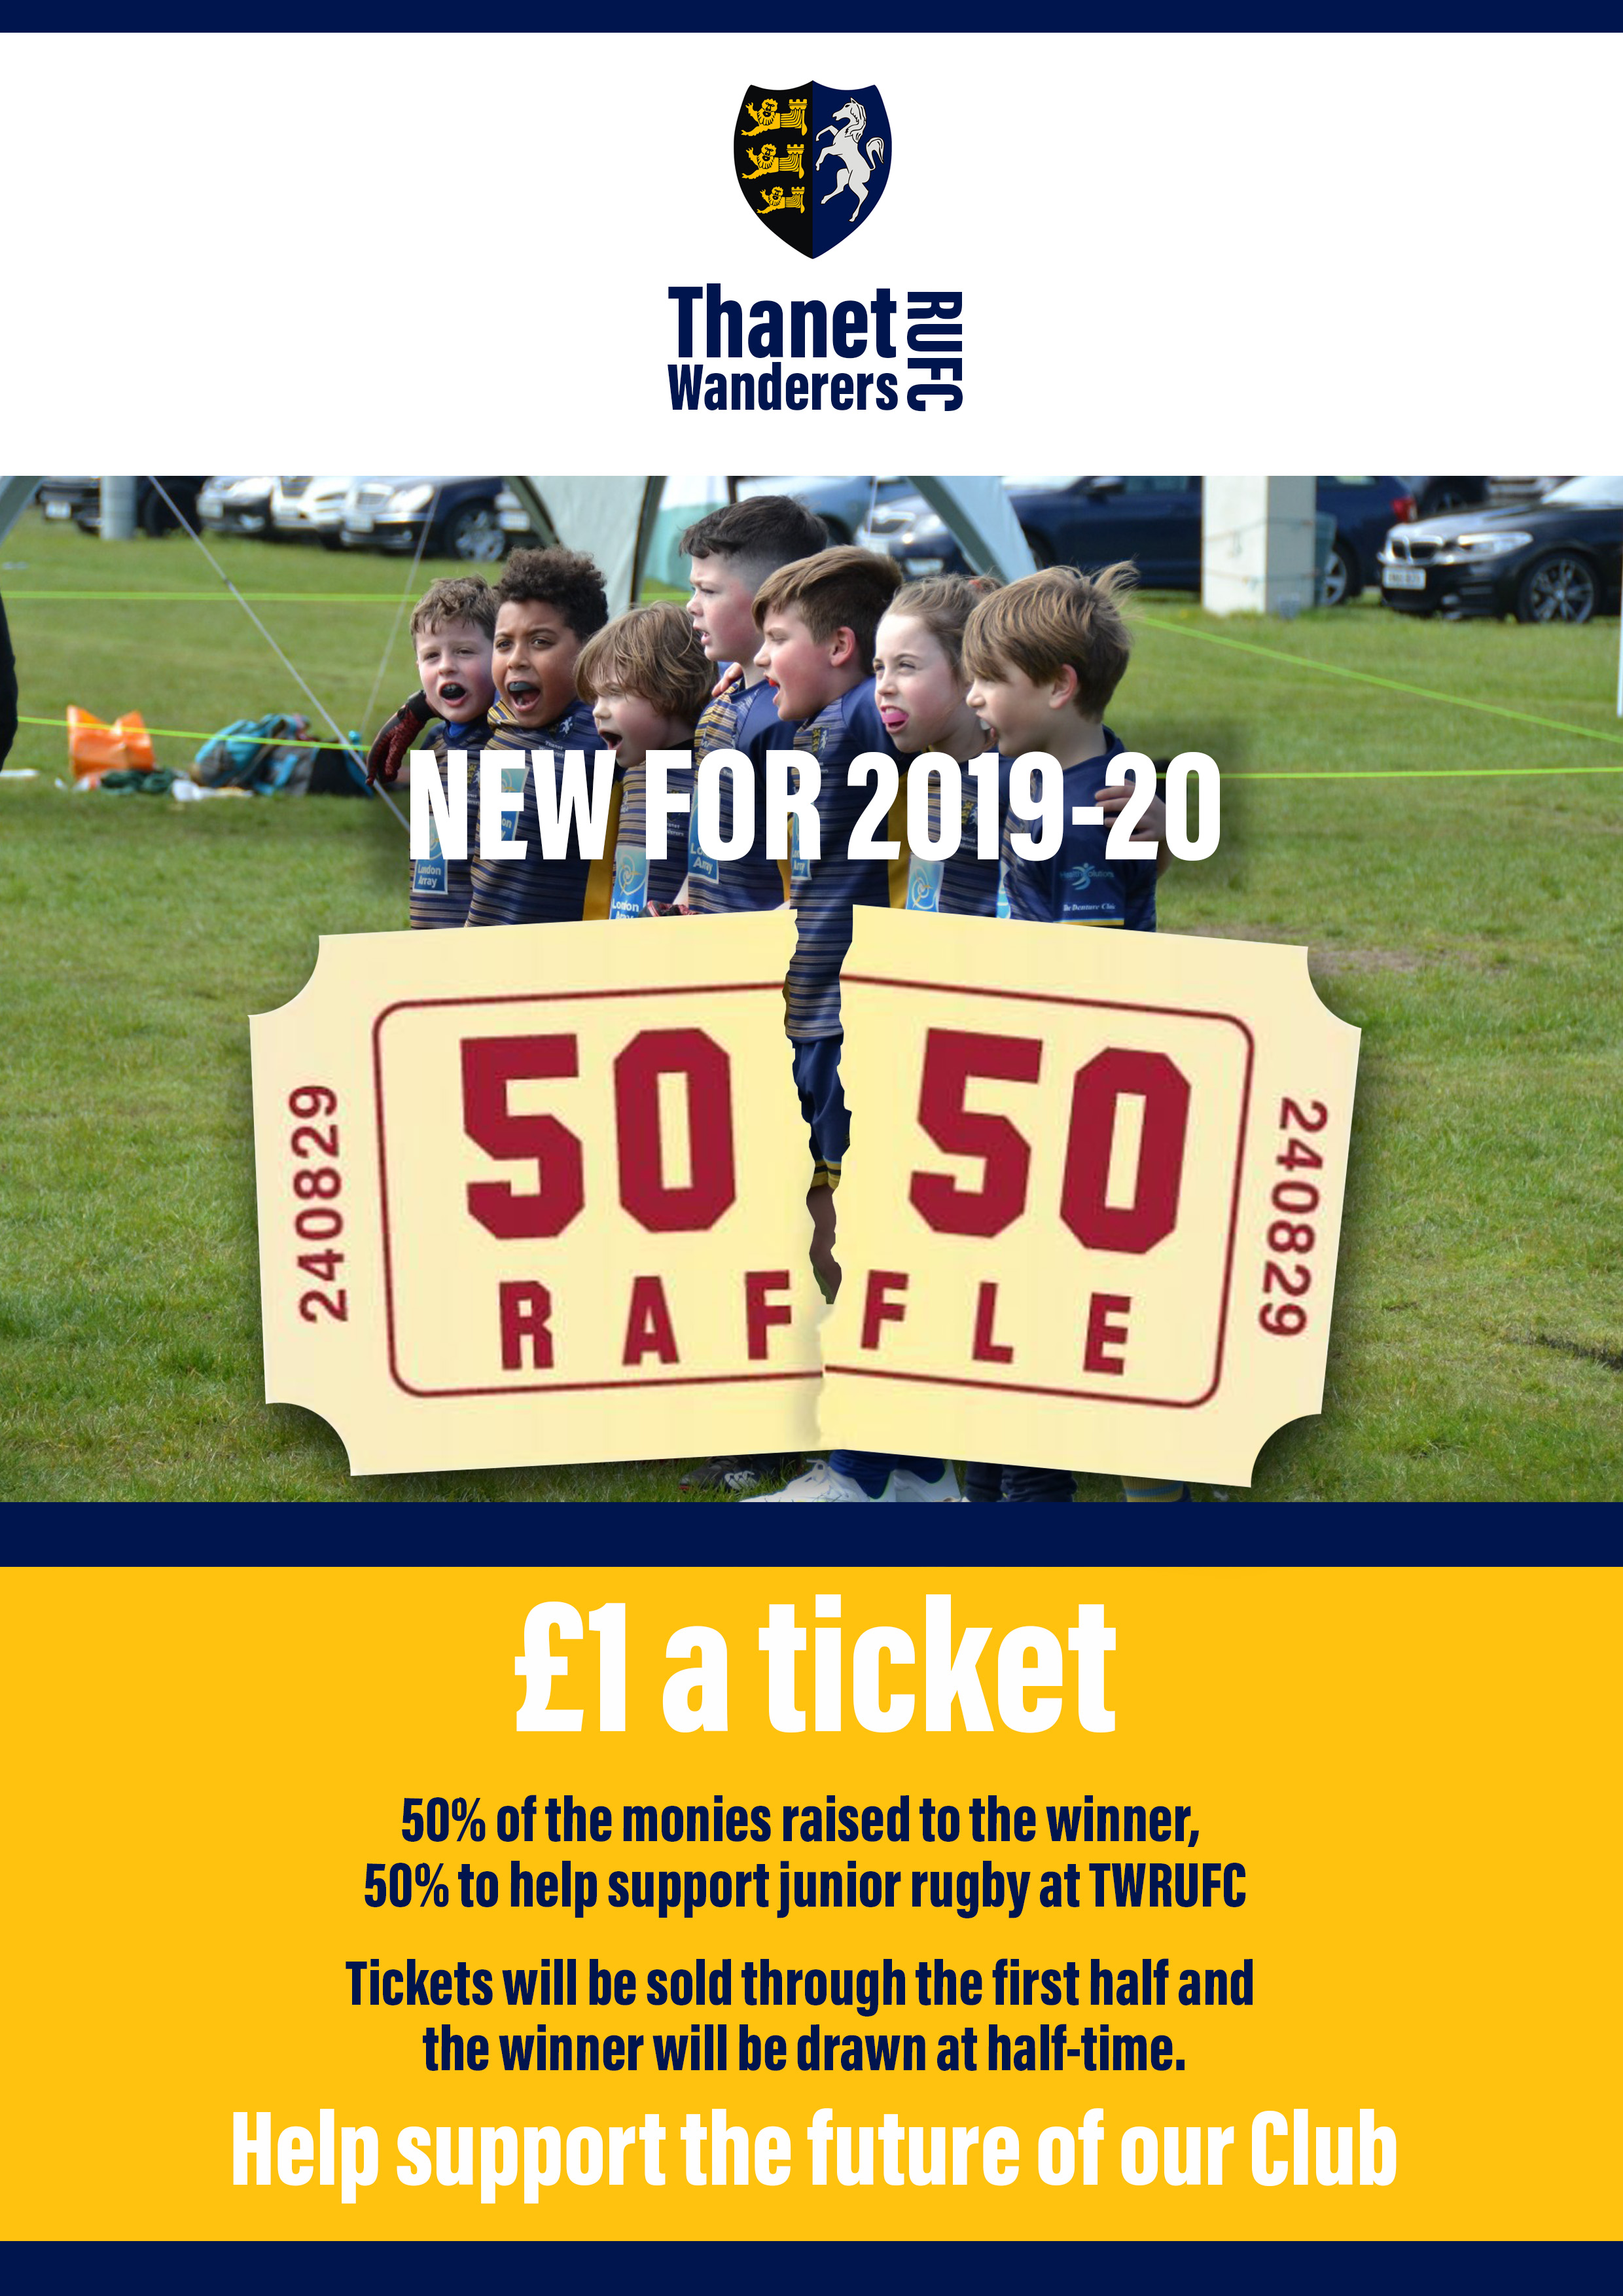 Image for the Buy a raffle ticket. Support the juniors news article